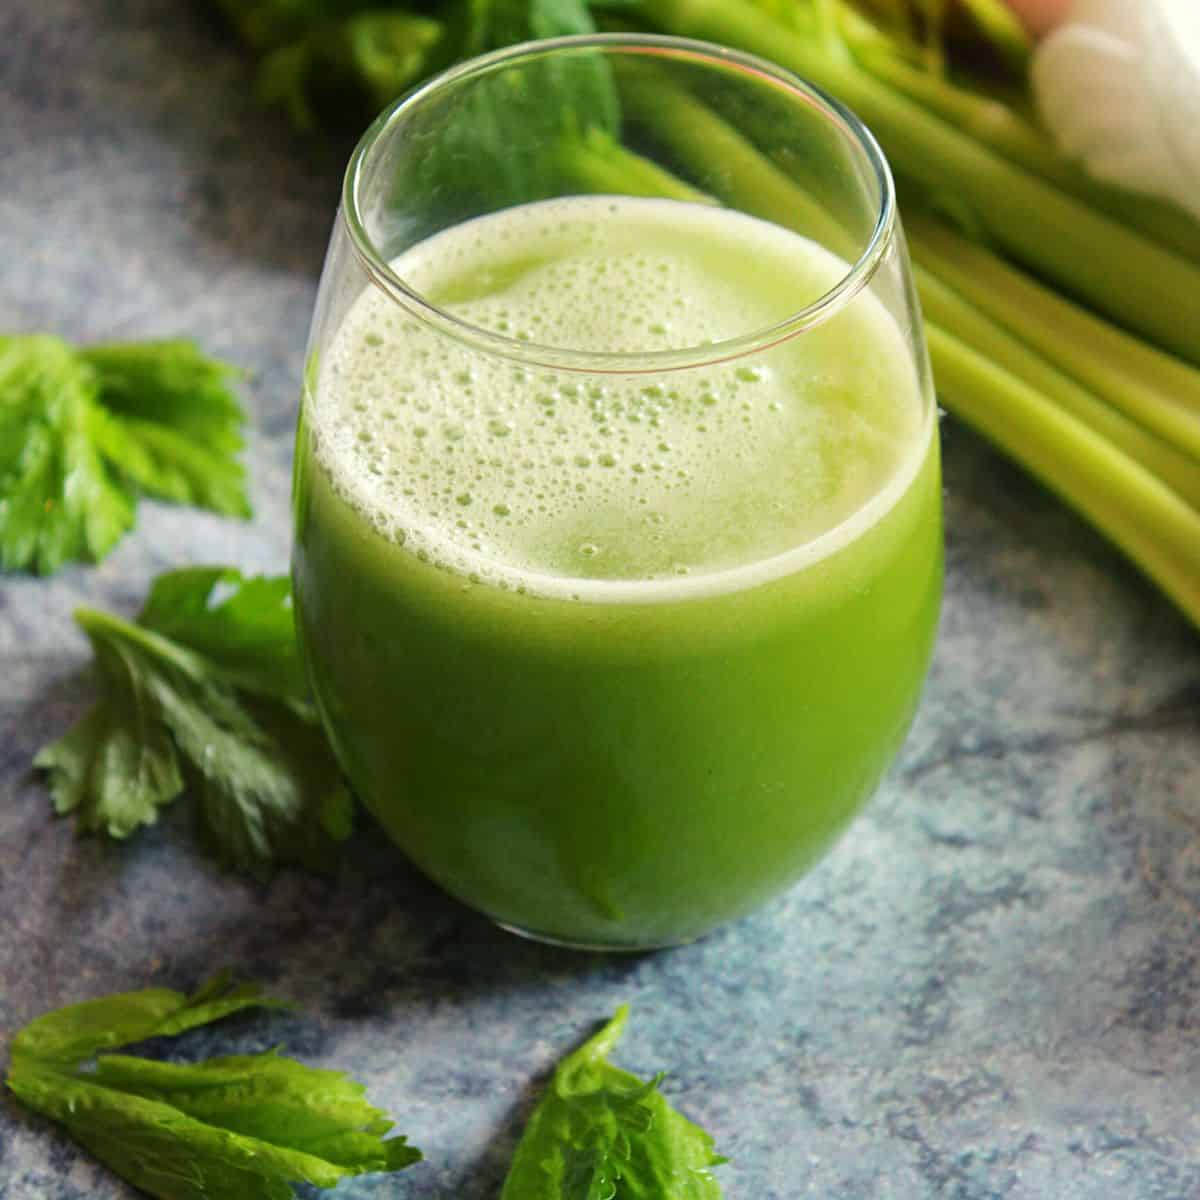 celery juice for weight loss recipe - Yummy Indian Kitchen